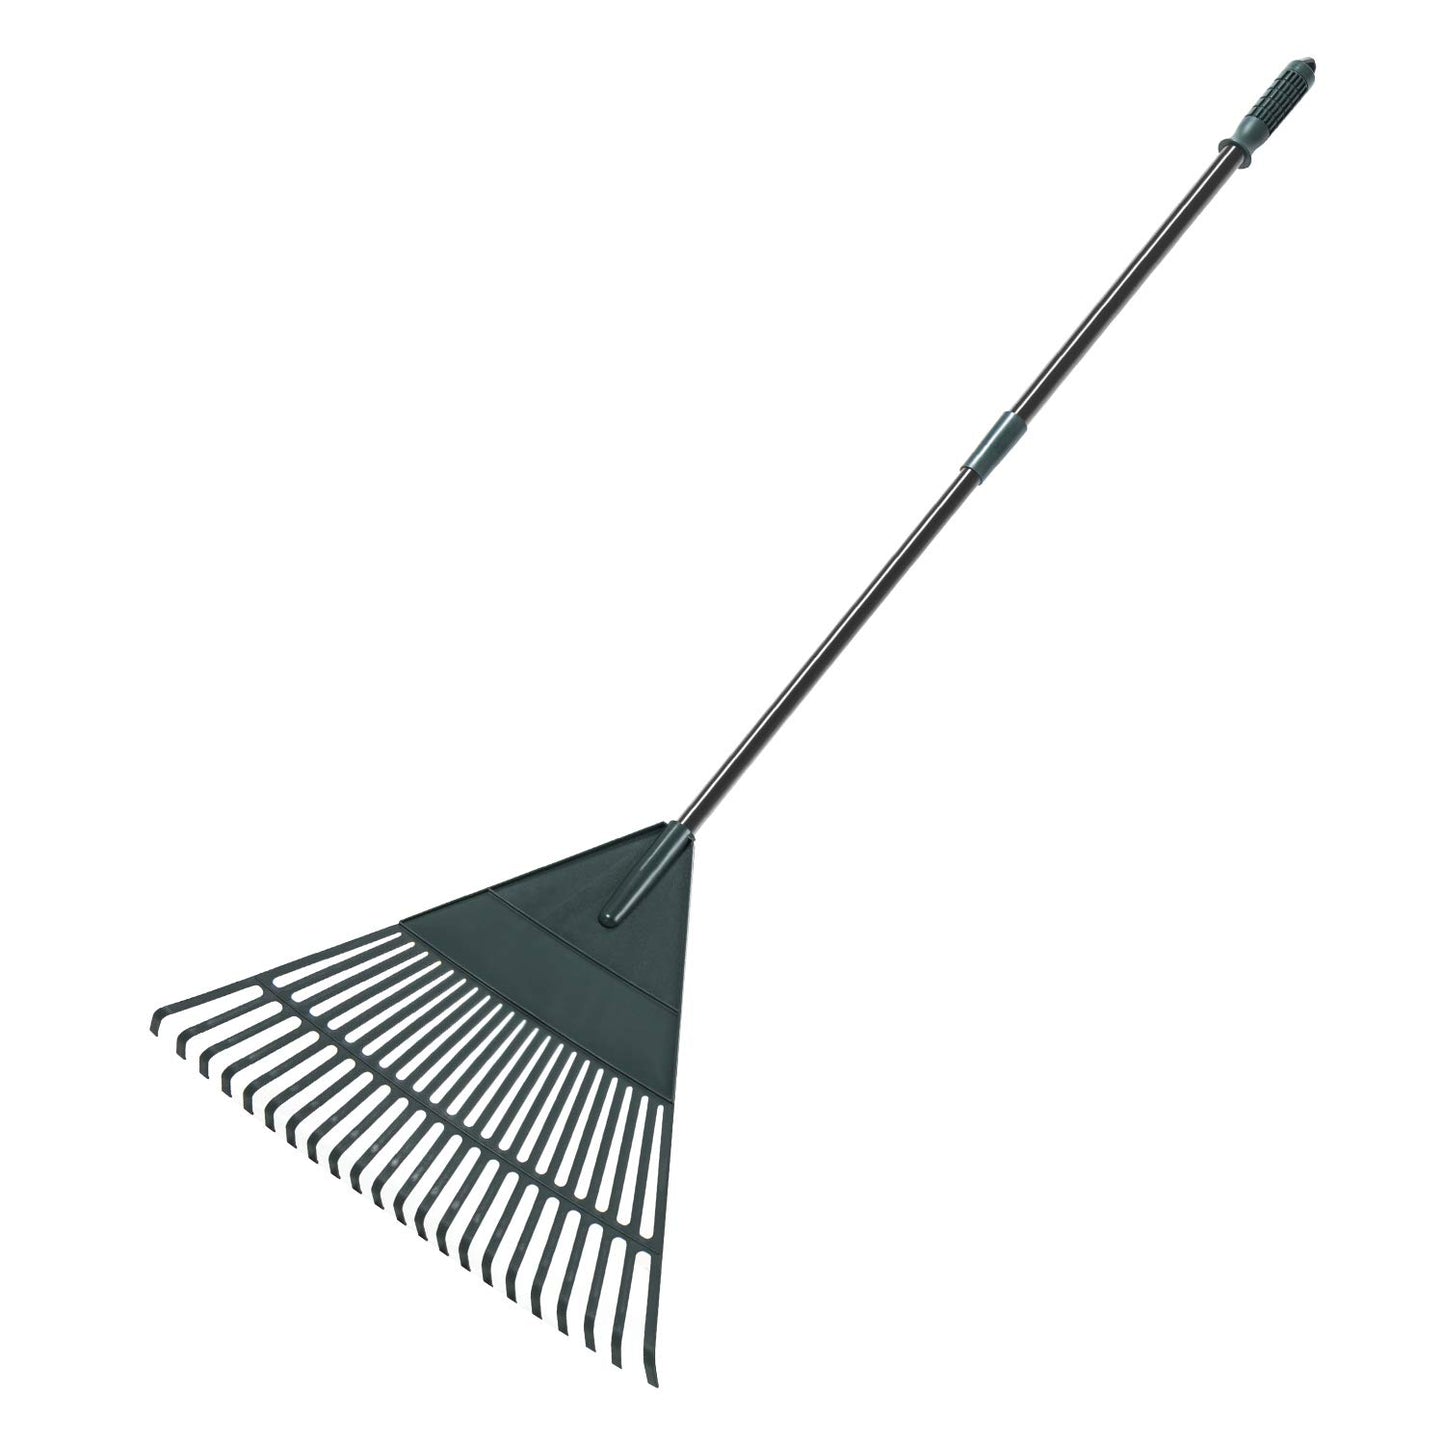 Garden Rake with Adjustable Extendable Steel Tube 42 to 60 Inches with 22 Tines